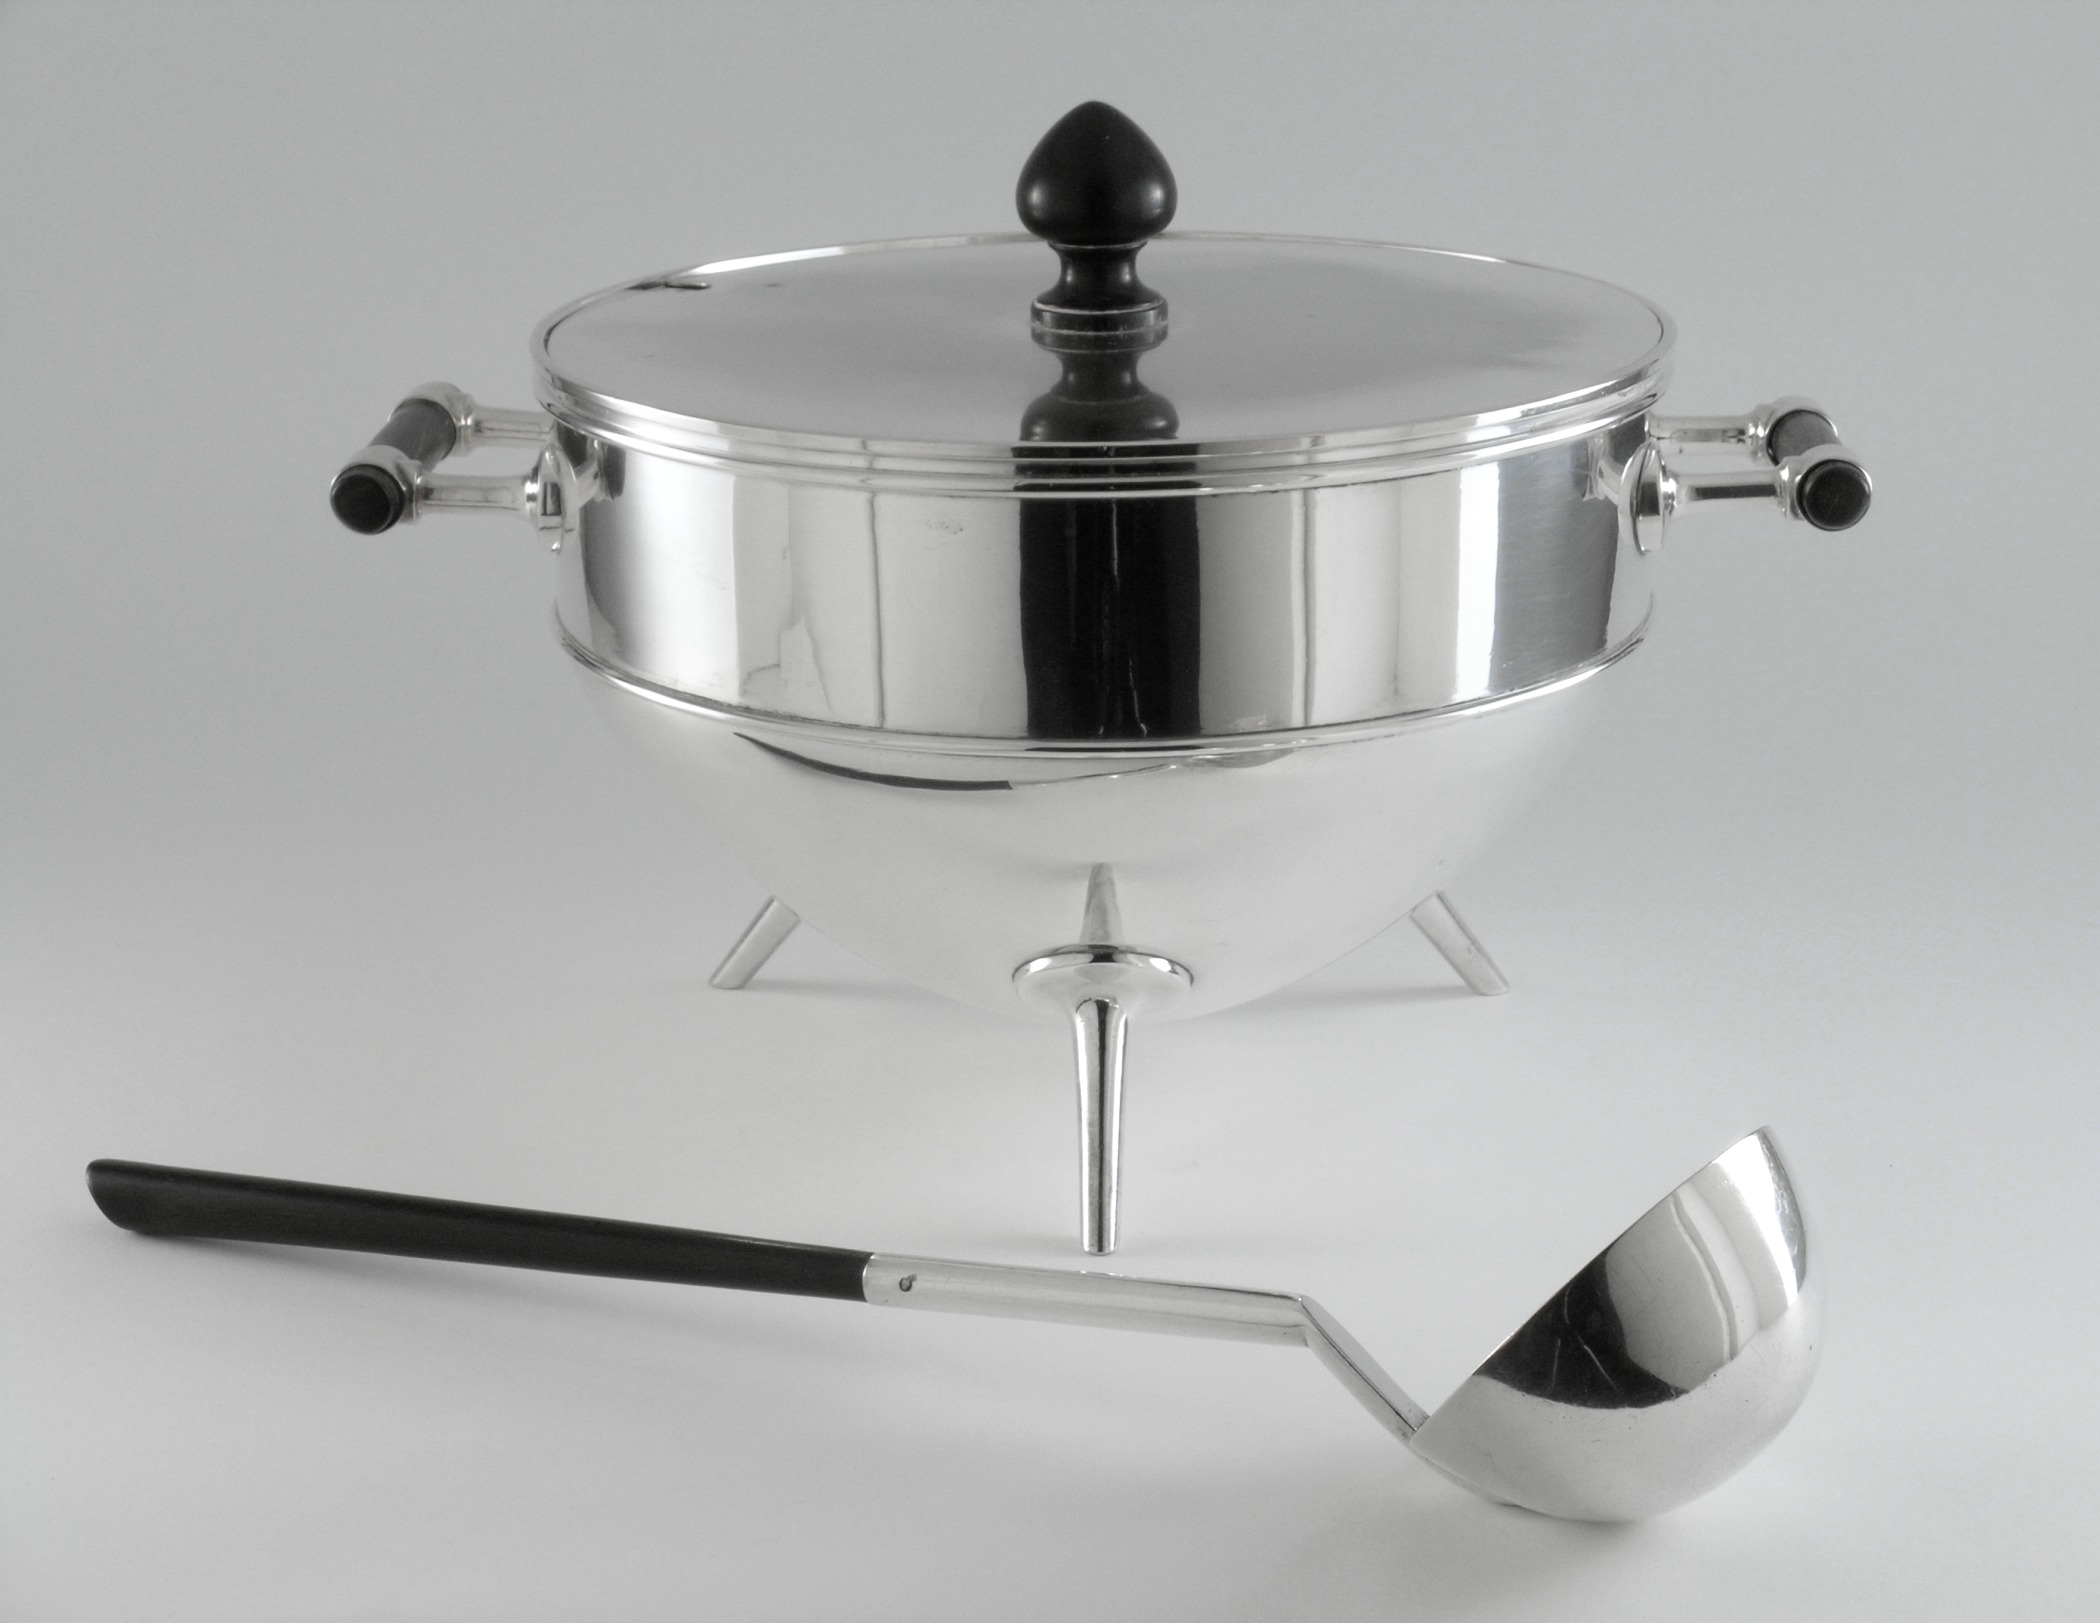 https://upload.wikimedia.org/wikipedia/commons/f/fc/Soup_Tureen_and_Ladle_LACMA_M.2000.89.1a-c.jpg